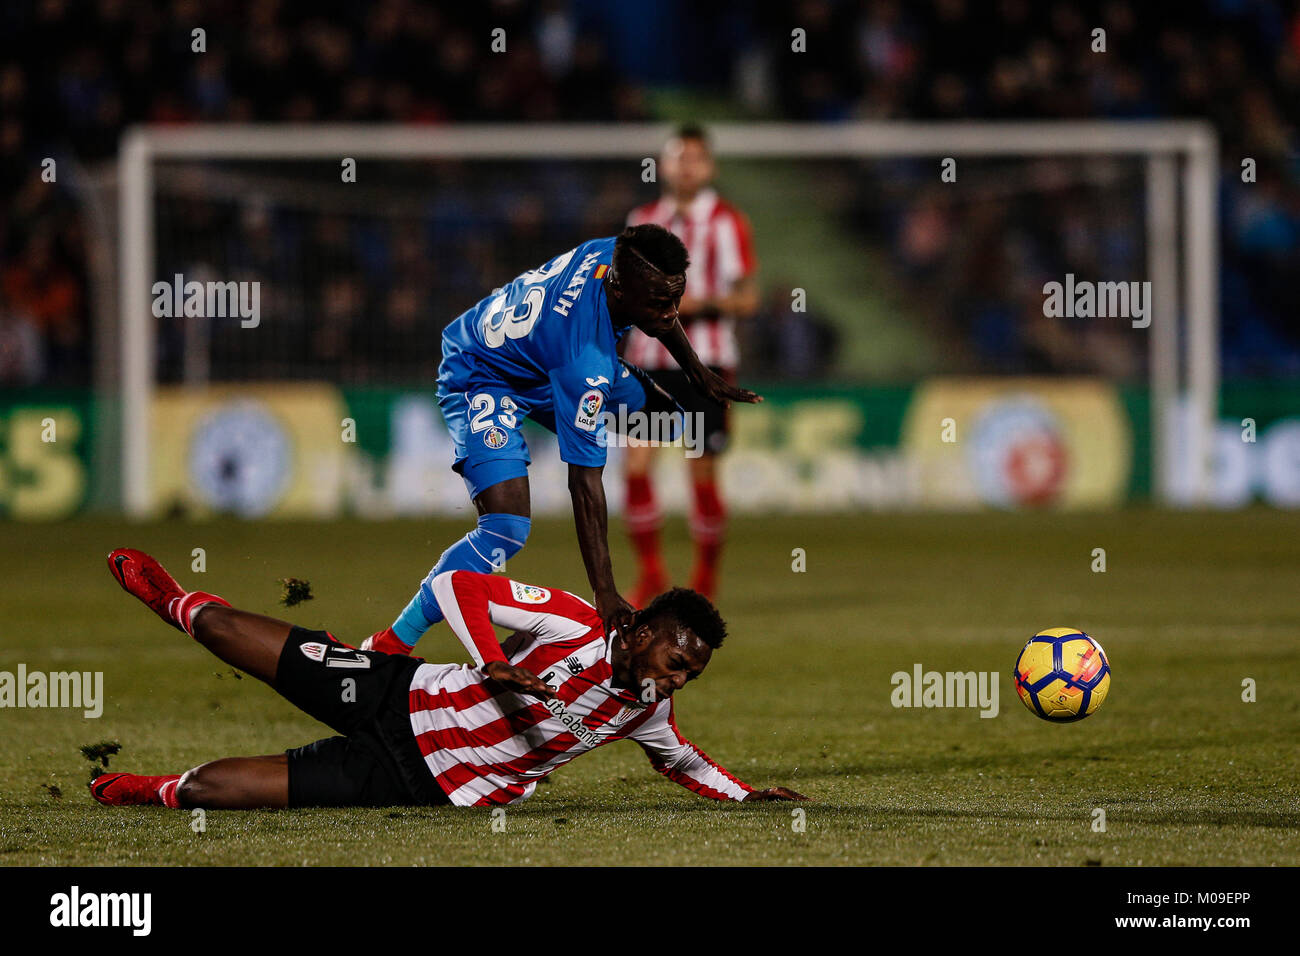 Inaki Williams (Athletic Club Bilbao) fights for control of the ball with Amath Ndiaye (Getafe CF), La Liga match between Getafe CF vs Athletic Club Bilbao at the Coliseum Alfonso Perez stadium in Madrid, Spain, January 19, 2018. Credit: Gtres Información más Comuniación on line, S.L./Alamy Live News Stock Photo